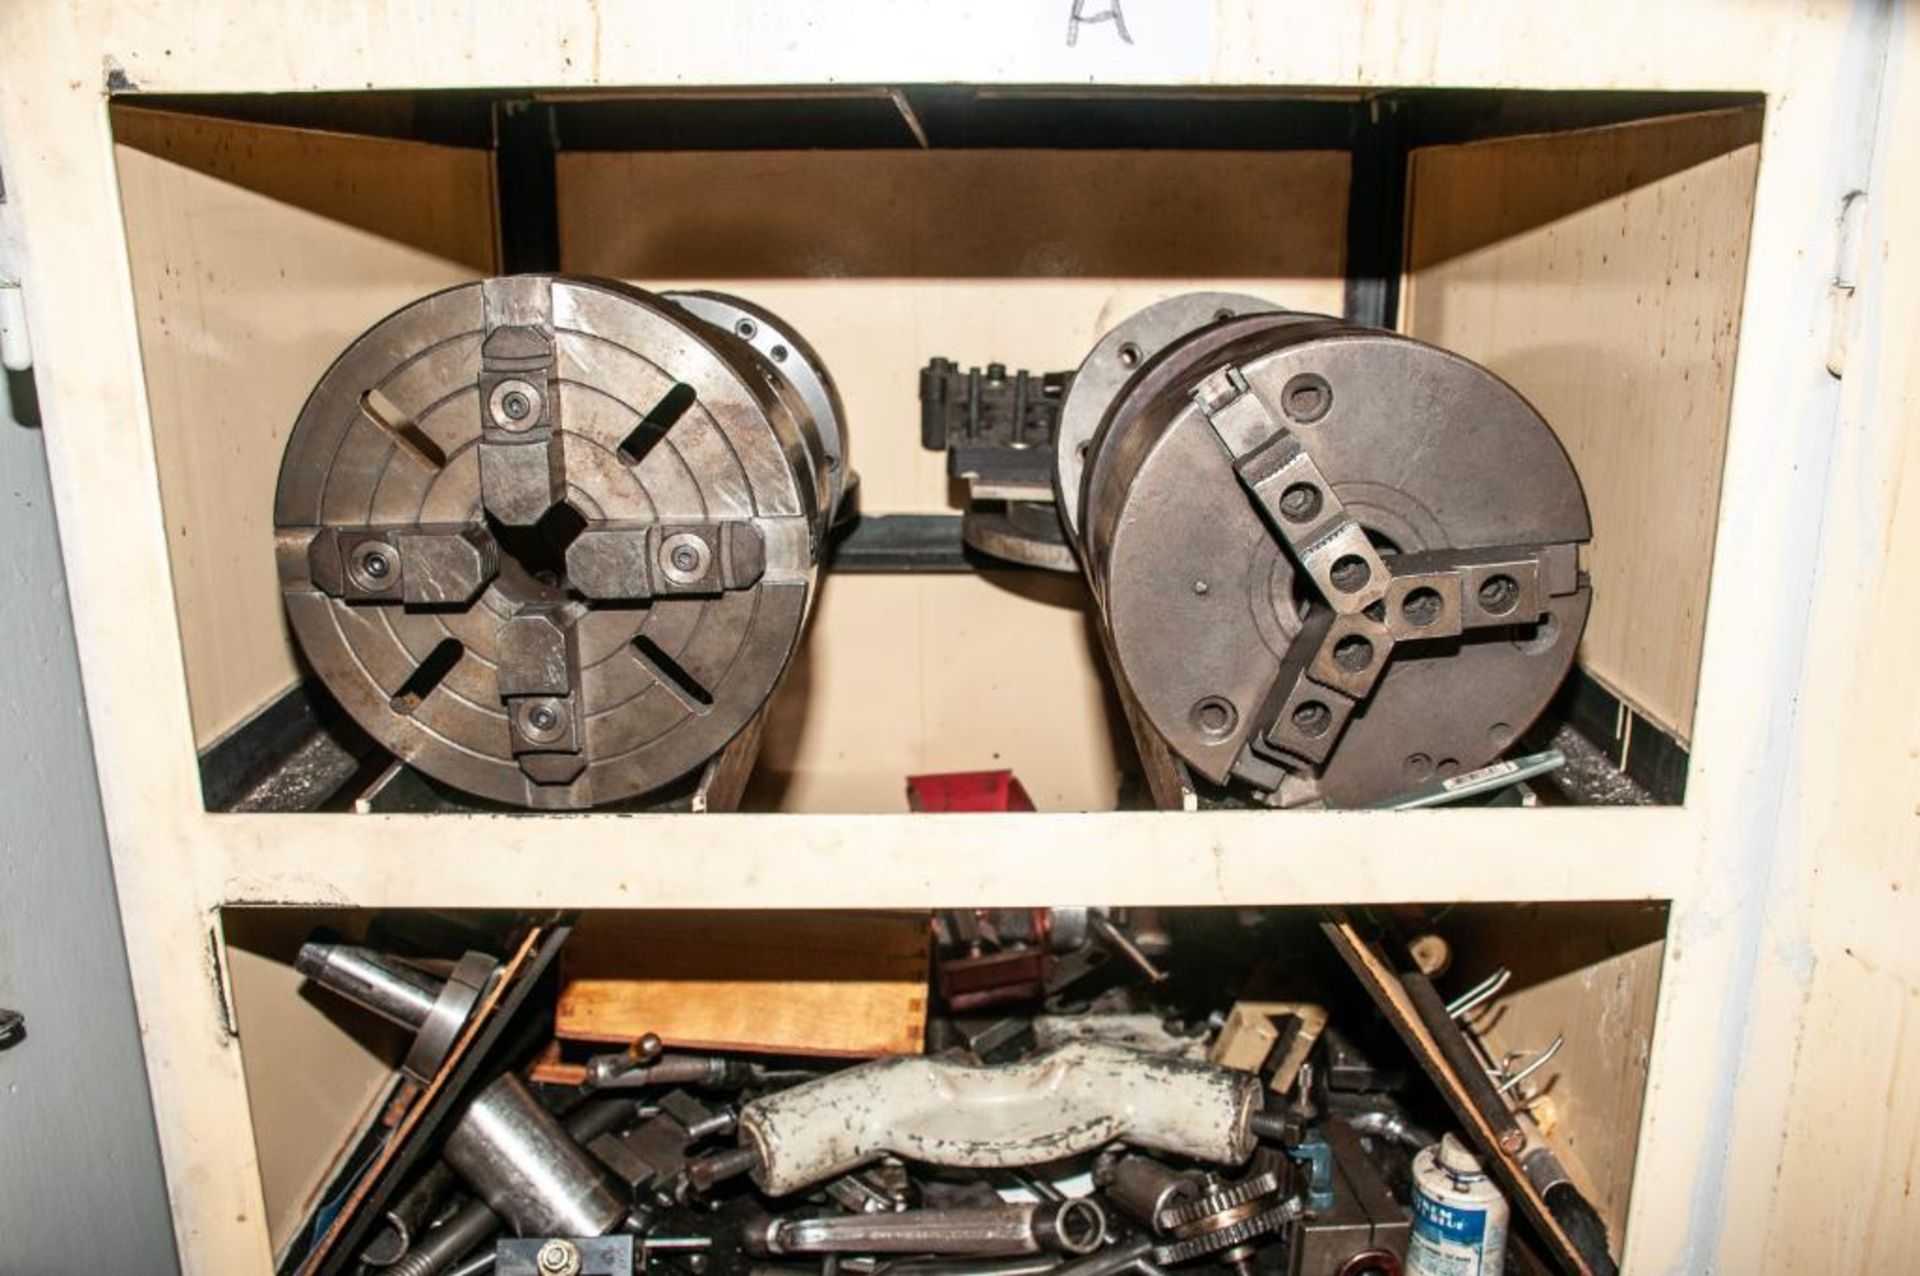 Cabinet Marked "Lathe Chucks & Tooling" w/ Contents, 3 & 4 Jaw Chucks, Steady Rest, Tool Holders, Ce - Image 4 of 4